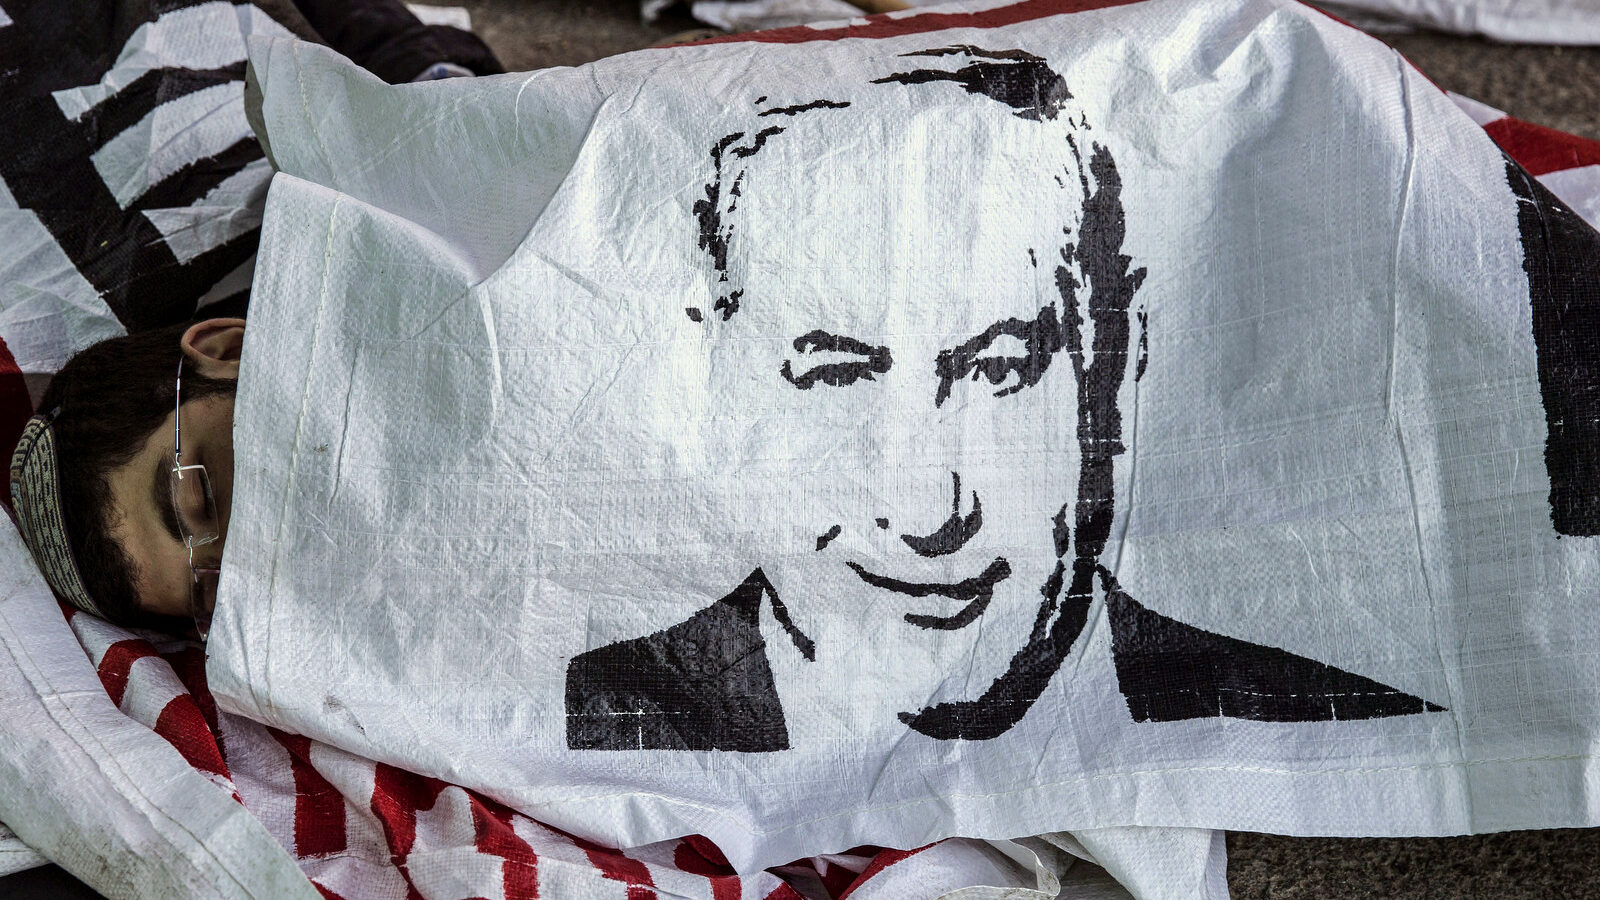 An Israeli settler sleeps under a banner of Israeli Prime Minister Benjamin Netanyahu, in the Jewish settlement of Beit El after a night stand off with police, near the West Bank town of Ramallah, Wednesday, July 29, 2015. The Israeli Prime Minister's office said Wednesday it has approved the "immediate construction" of 300 housing units in the West Bank settlement of Beit El. The announcement came amid a standoff, where Israeli settlers clashed with Israeli forces as authorities began to dismantle the contested West Bank settlement housing complex after Israel's Supreme Court ruled Wednesday that it must be demolished. (AP Photo/Tsafrir Abayov)